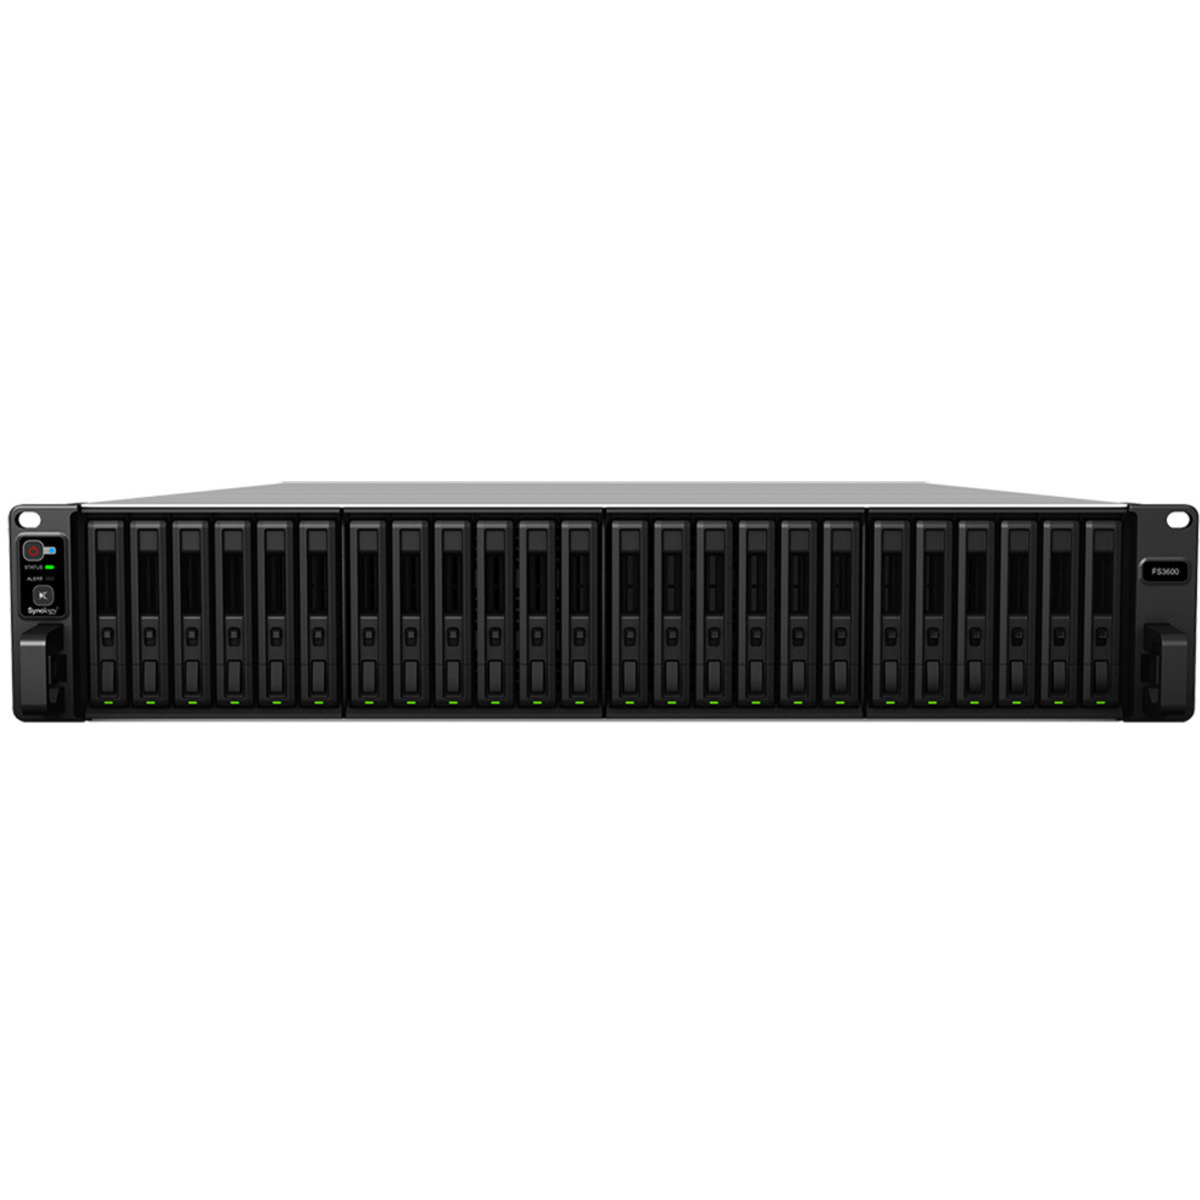 buy Synology FlashStation FS3600 RackMount NAS - Network Attached Storage Device Burn-In Tested Configurations - FREE RAM UPGRADE - nas headquarters buy network attached storage server device das new raid-5 free shipping usa FlashStation FS3600